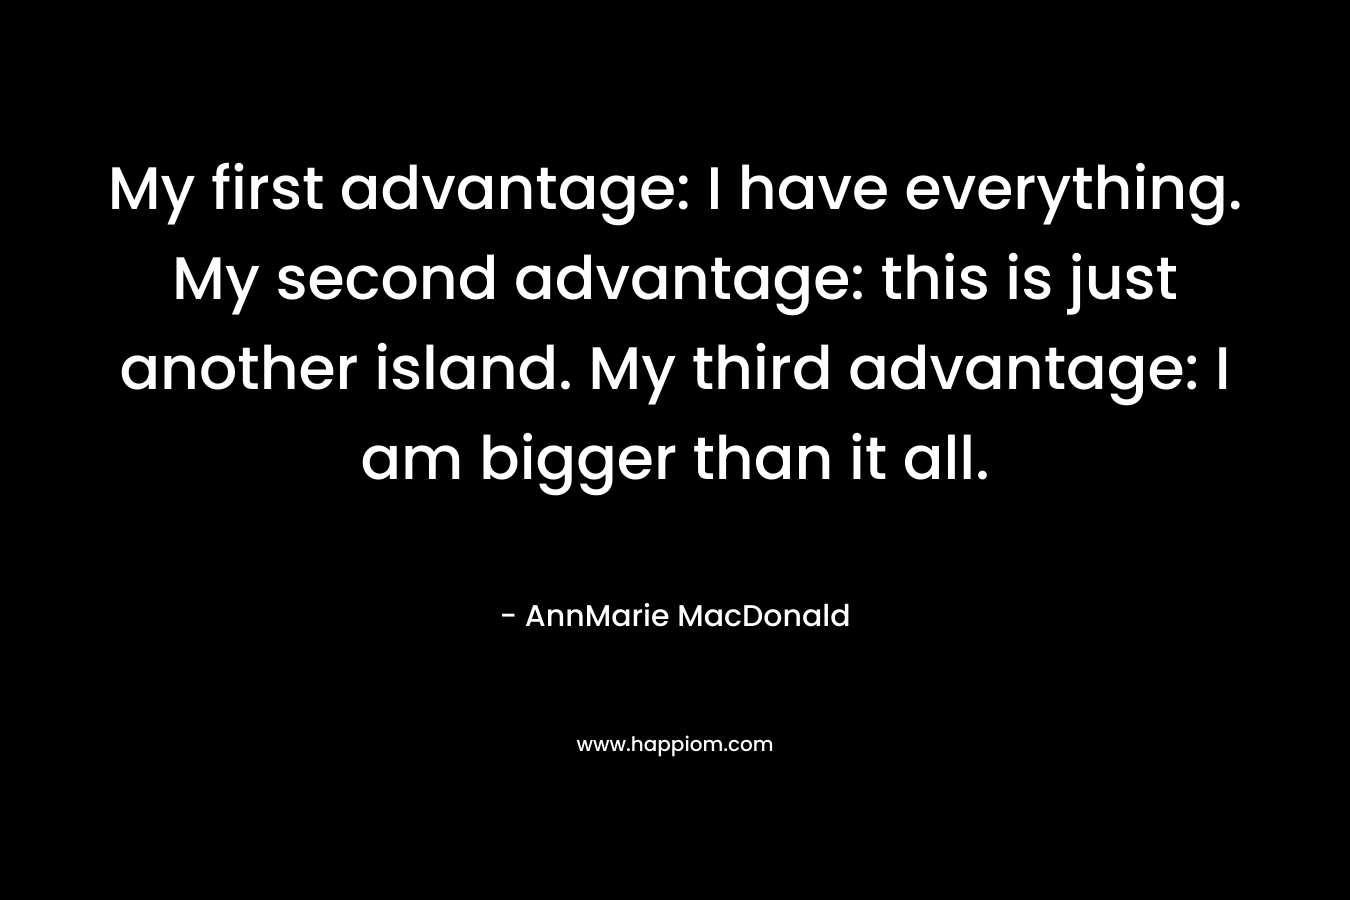 My first advantage: I have everything. My second advantage: this is just another island. My third advantage: I am bigger than it all.